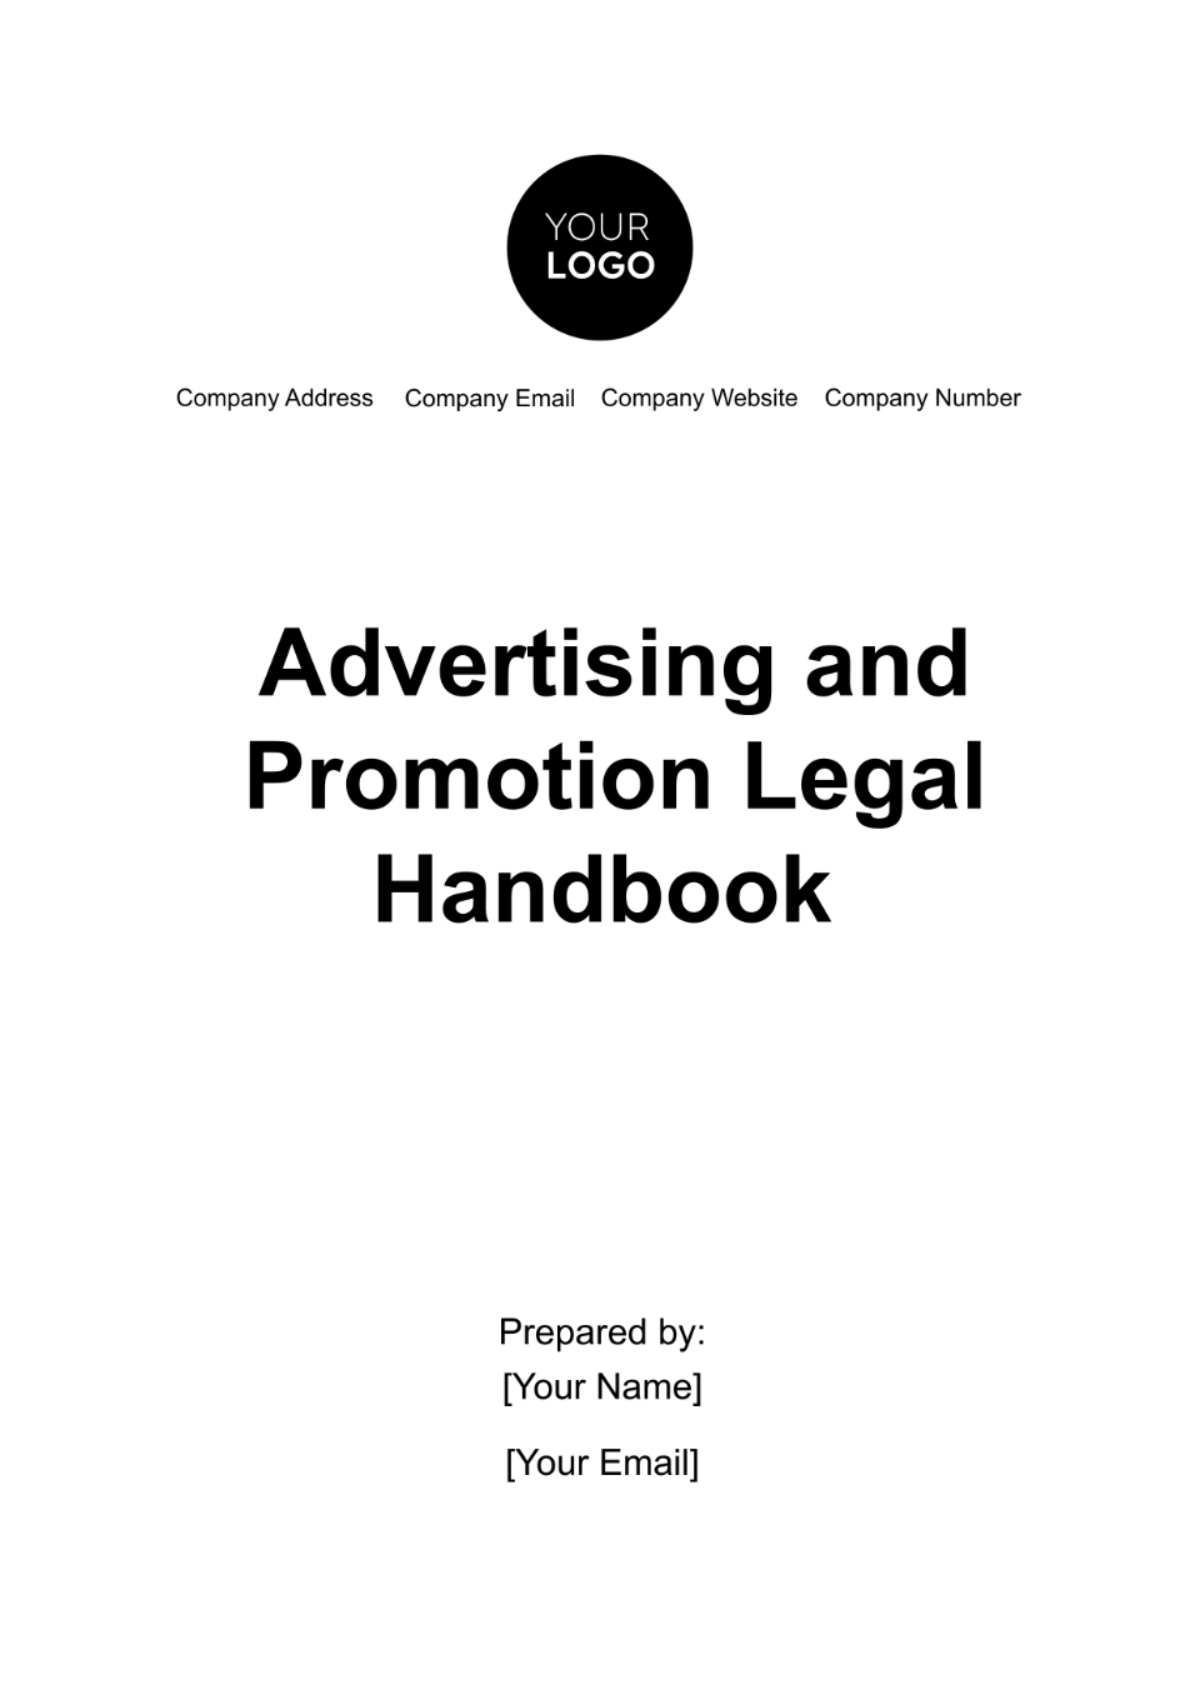 Advertising and Promotion Legal Handbook Template